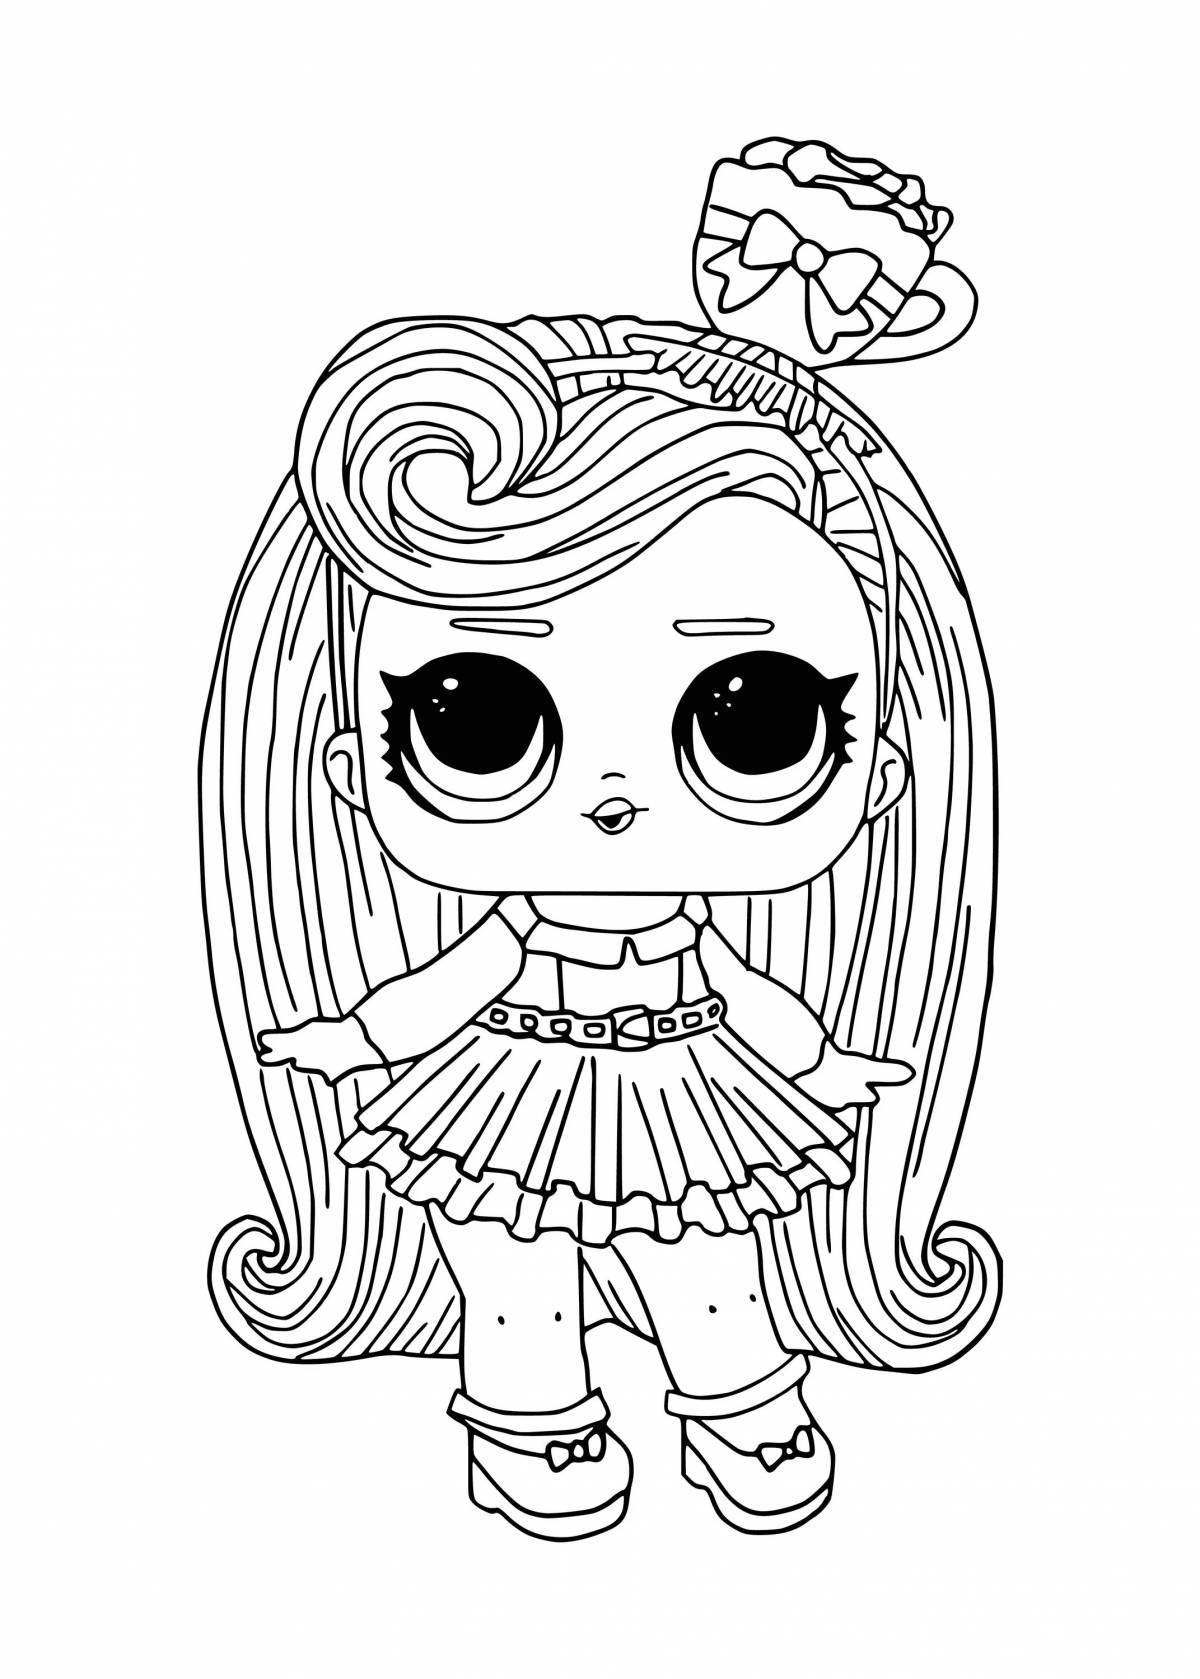 Exquisite coloring page loo